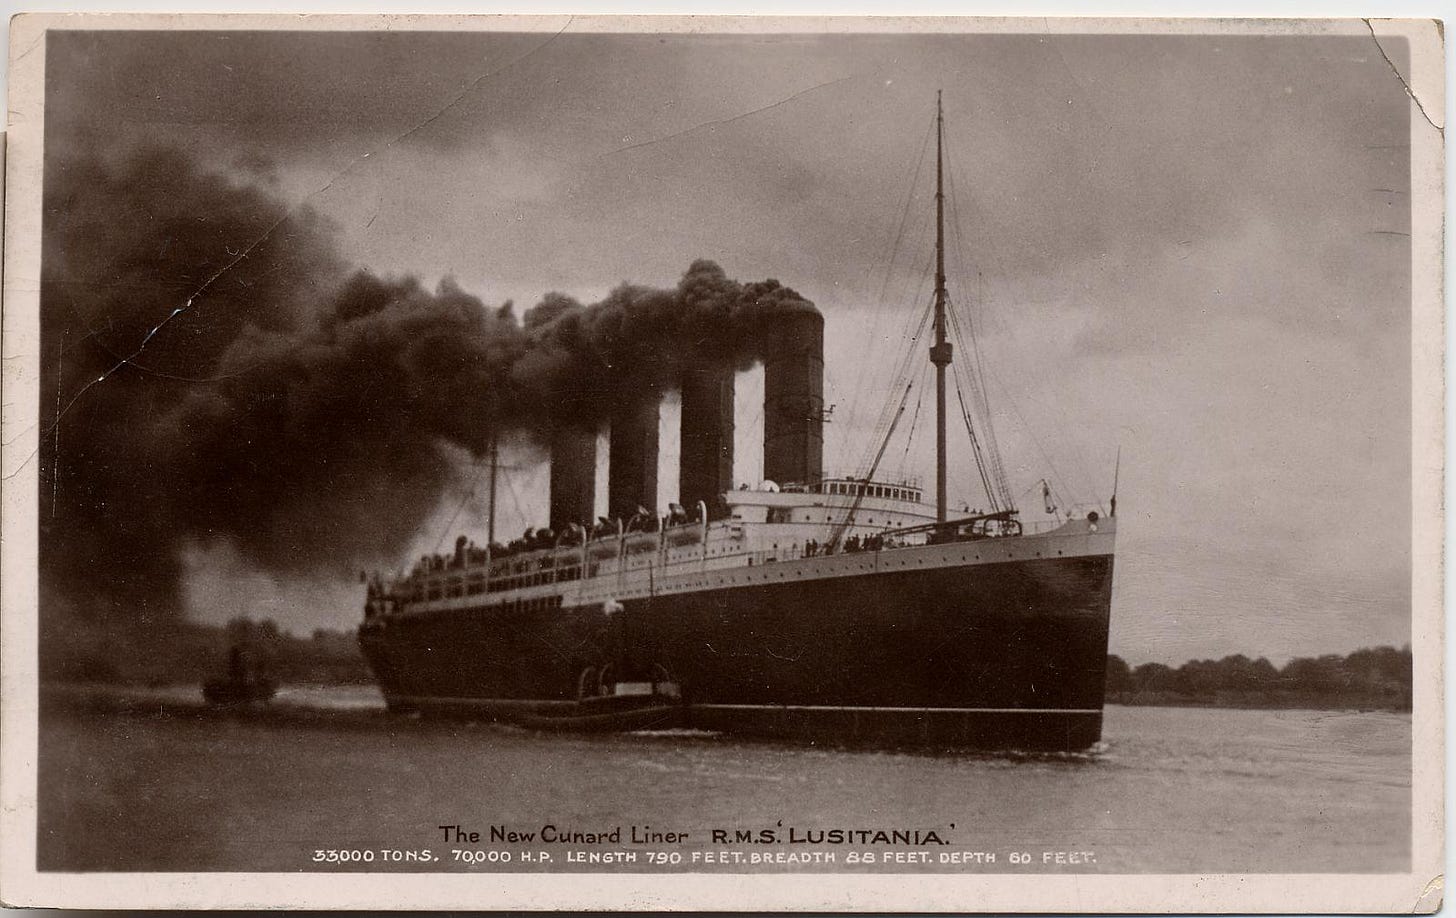 A lovely Cunard Postcard of the RMS Lusitania